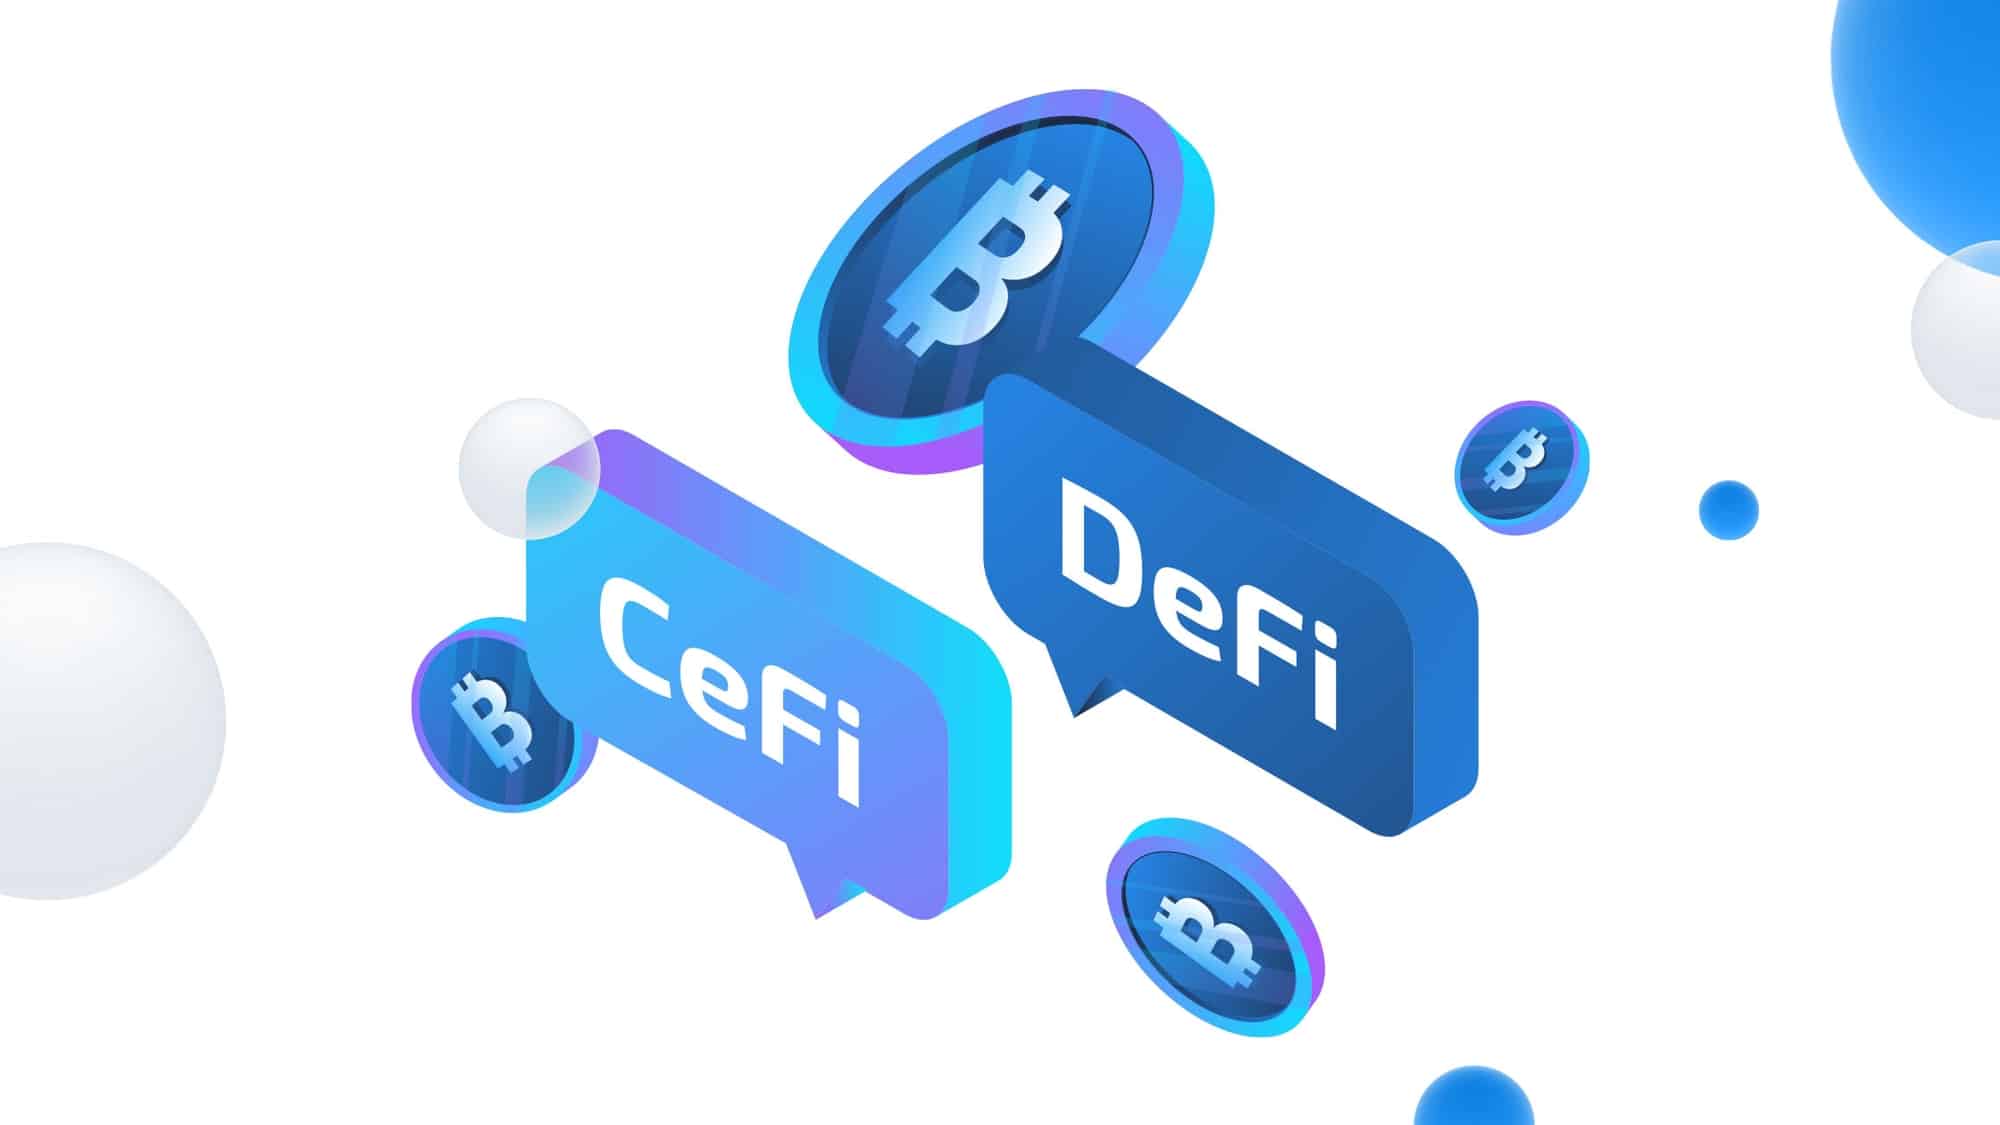 what is defi